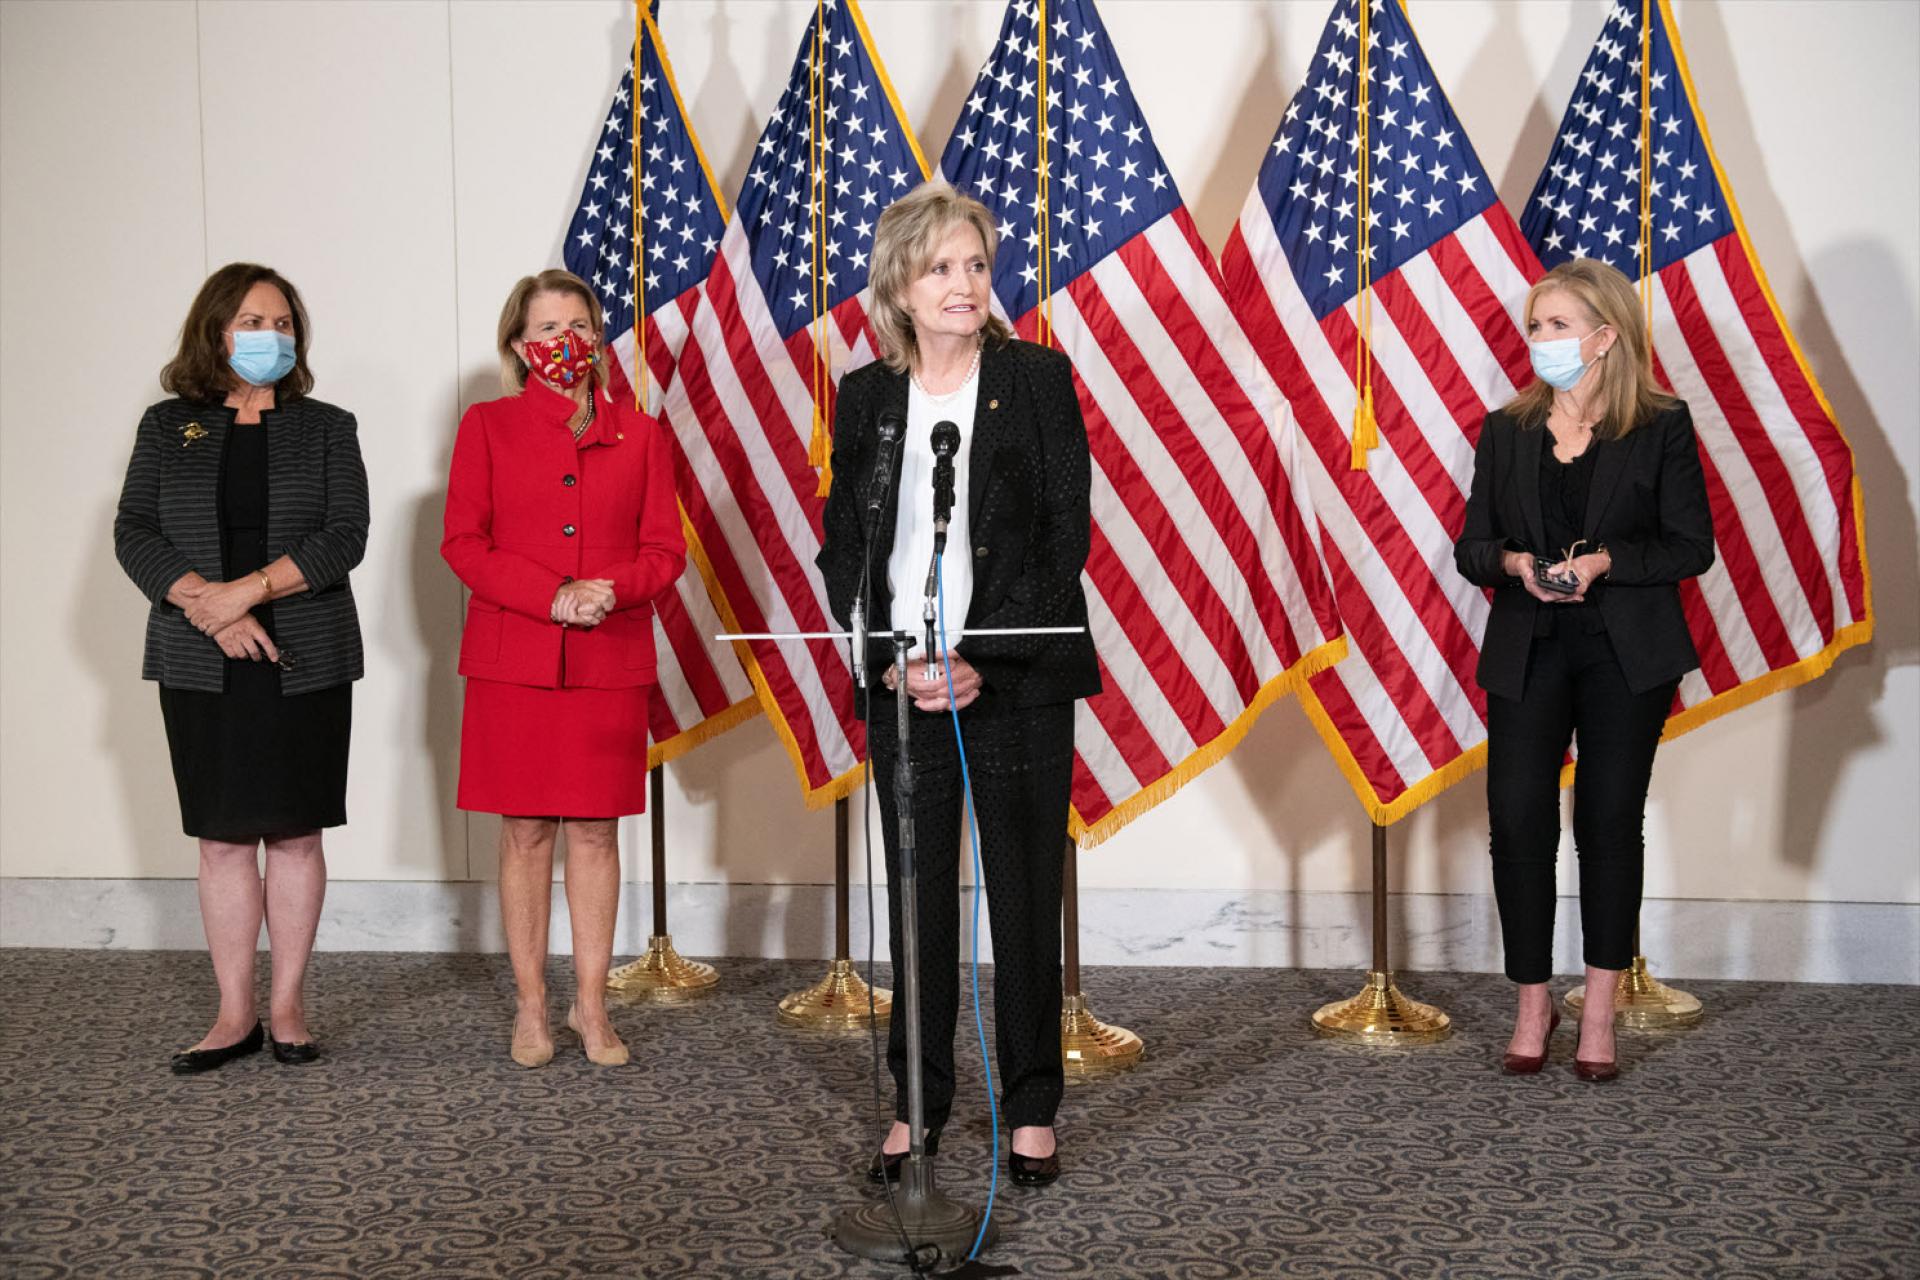 Senator Hyde-Smith speaks at a news conference regarding Amy Coney Barrett’s nomination to serve on the U.S. Supreme Court. (Sept. 30, 2020)